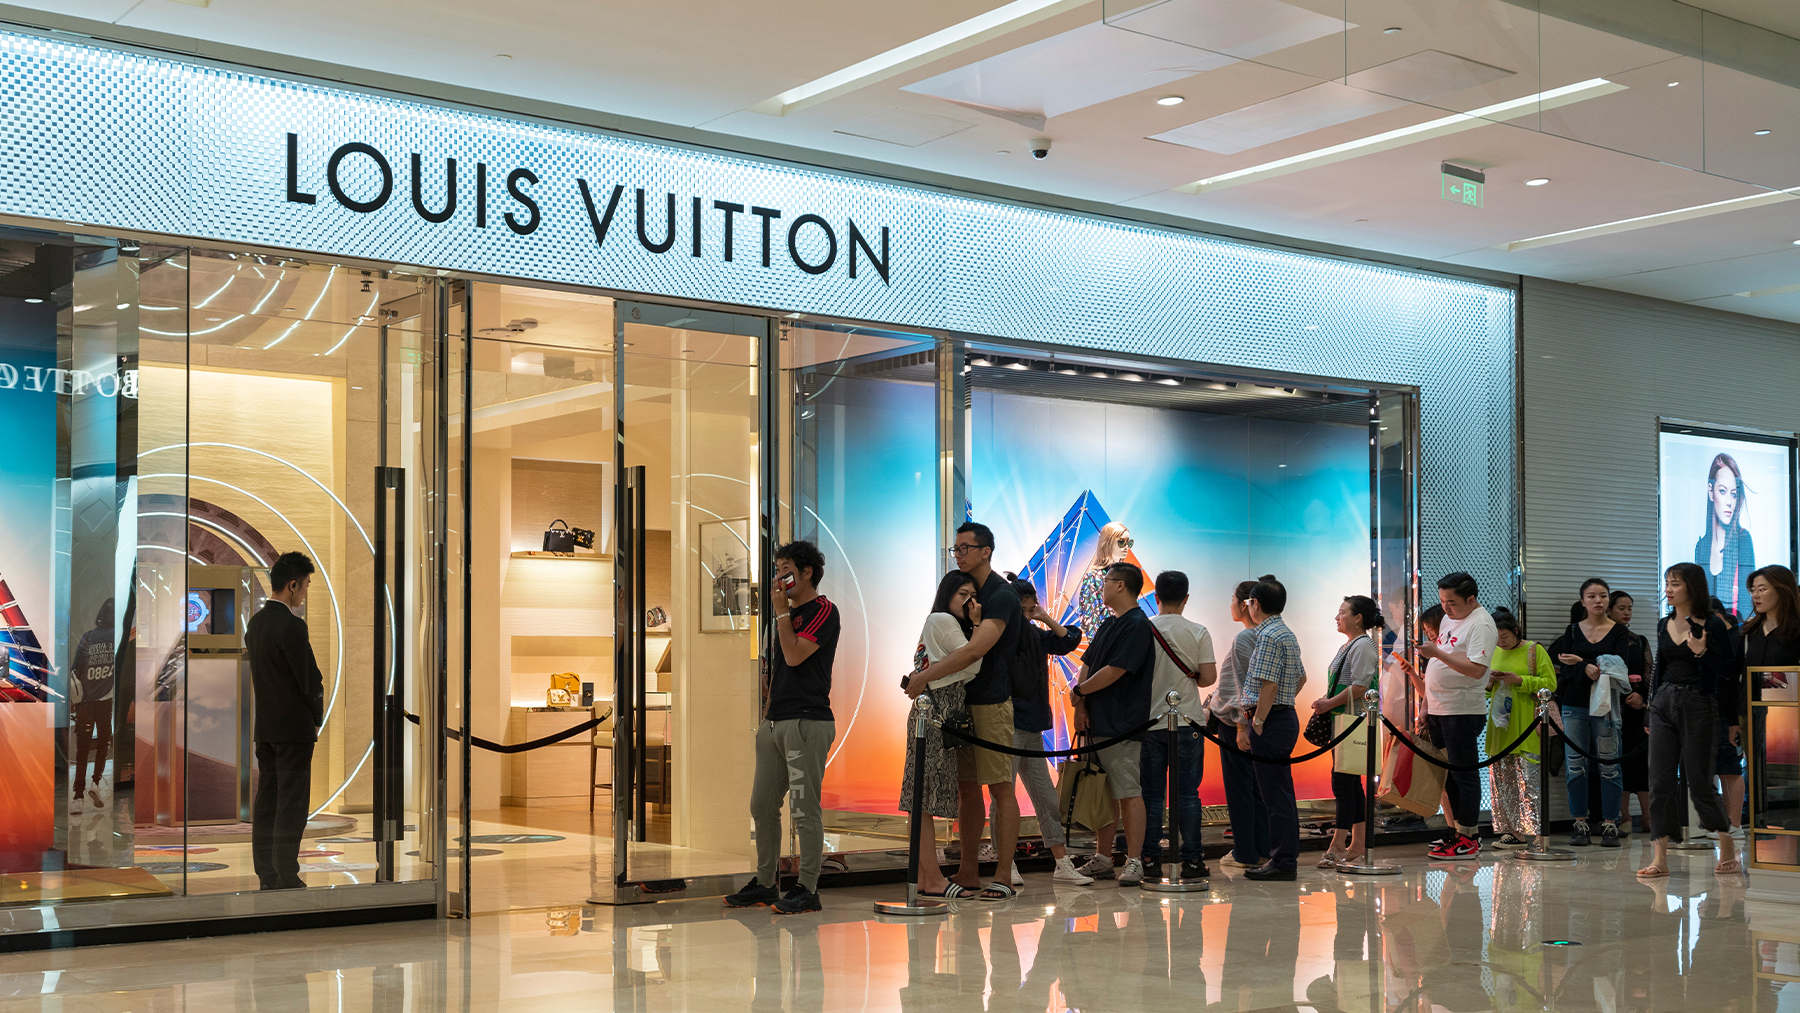 Record year for LVMH Moet Hennessy Louis Vuitton - Inside Retail Asia